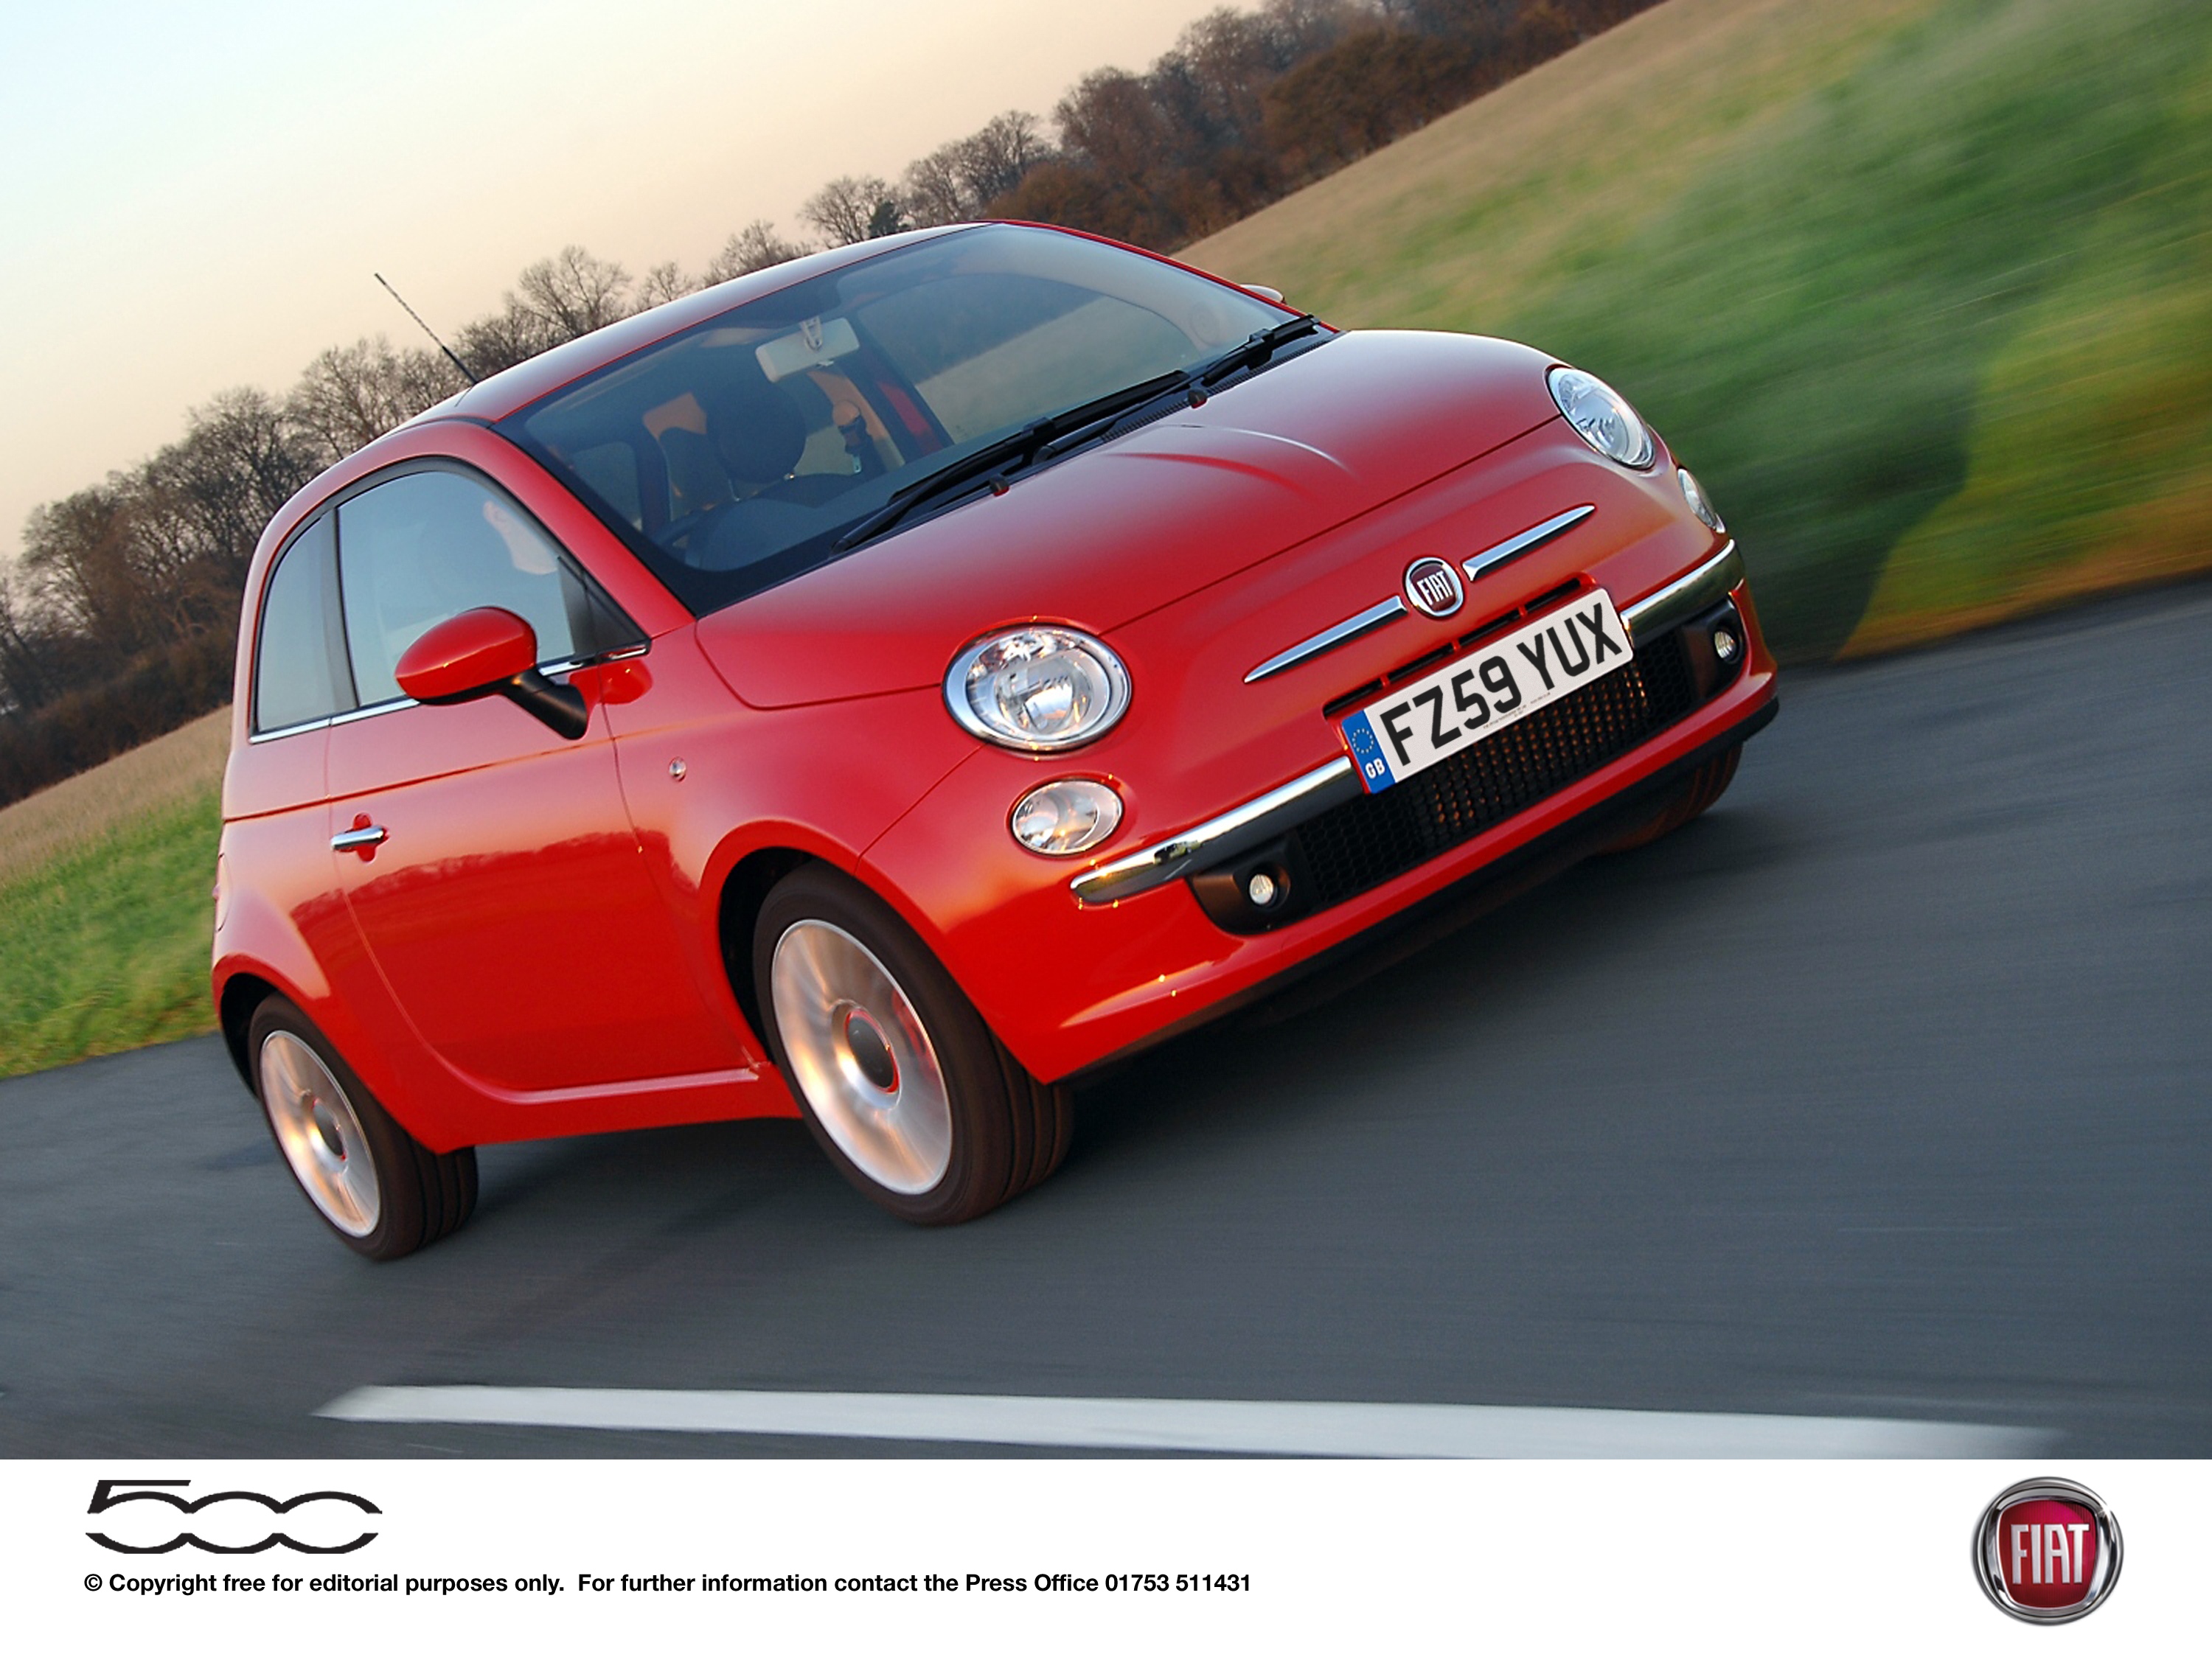 FIAT 500 BREAKS INTO UK TOP 10 SALES FIGURES FOR FIRST TIME - Press